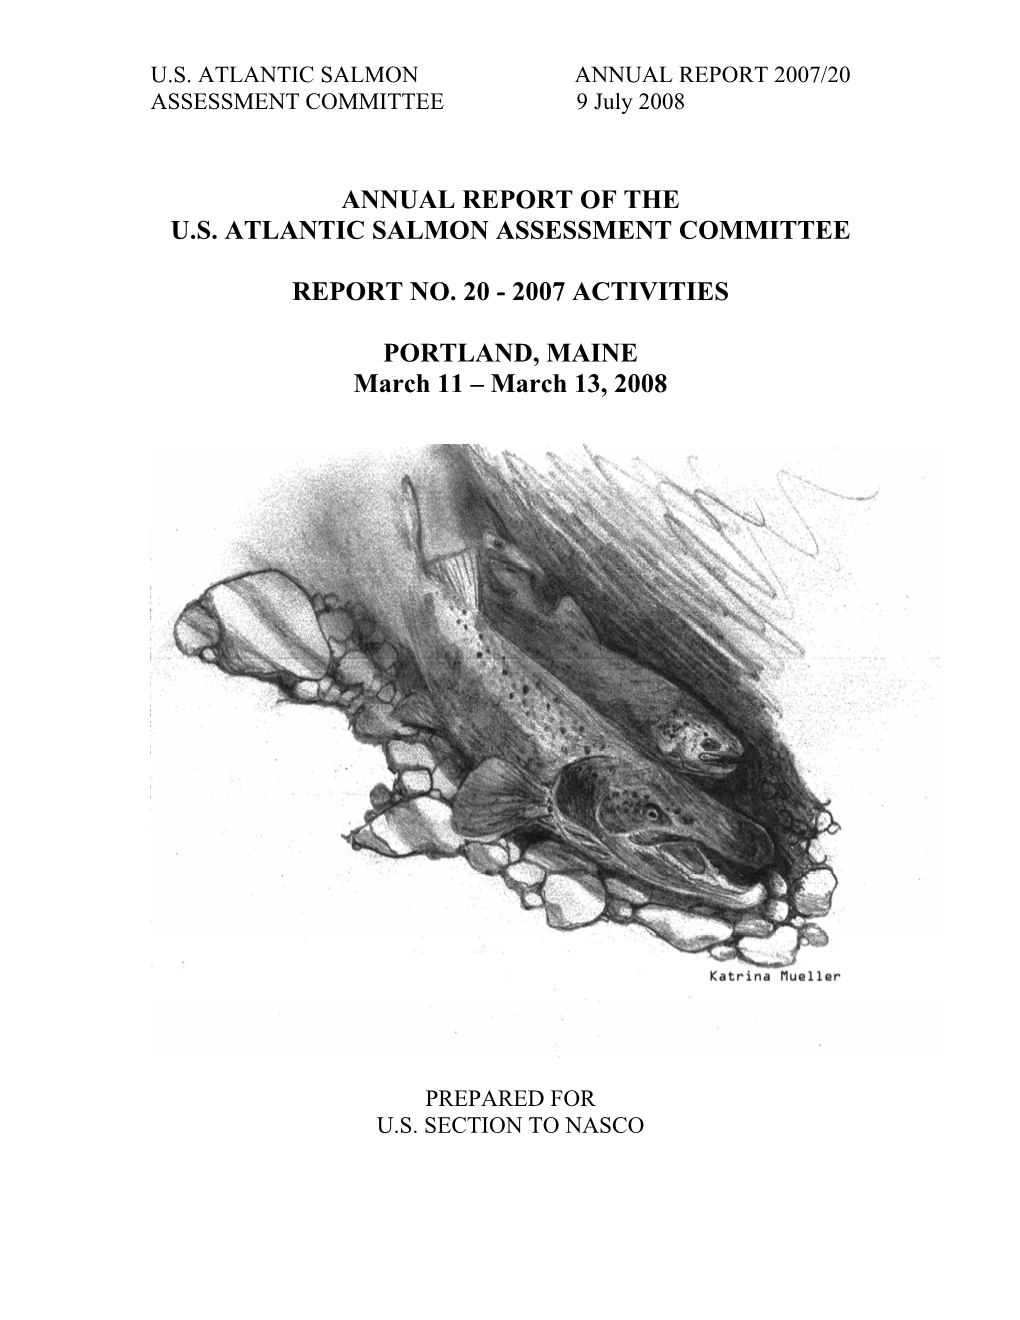 Annual Report of the U.S. Atlantic Salmon Assessment Committee